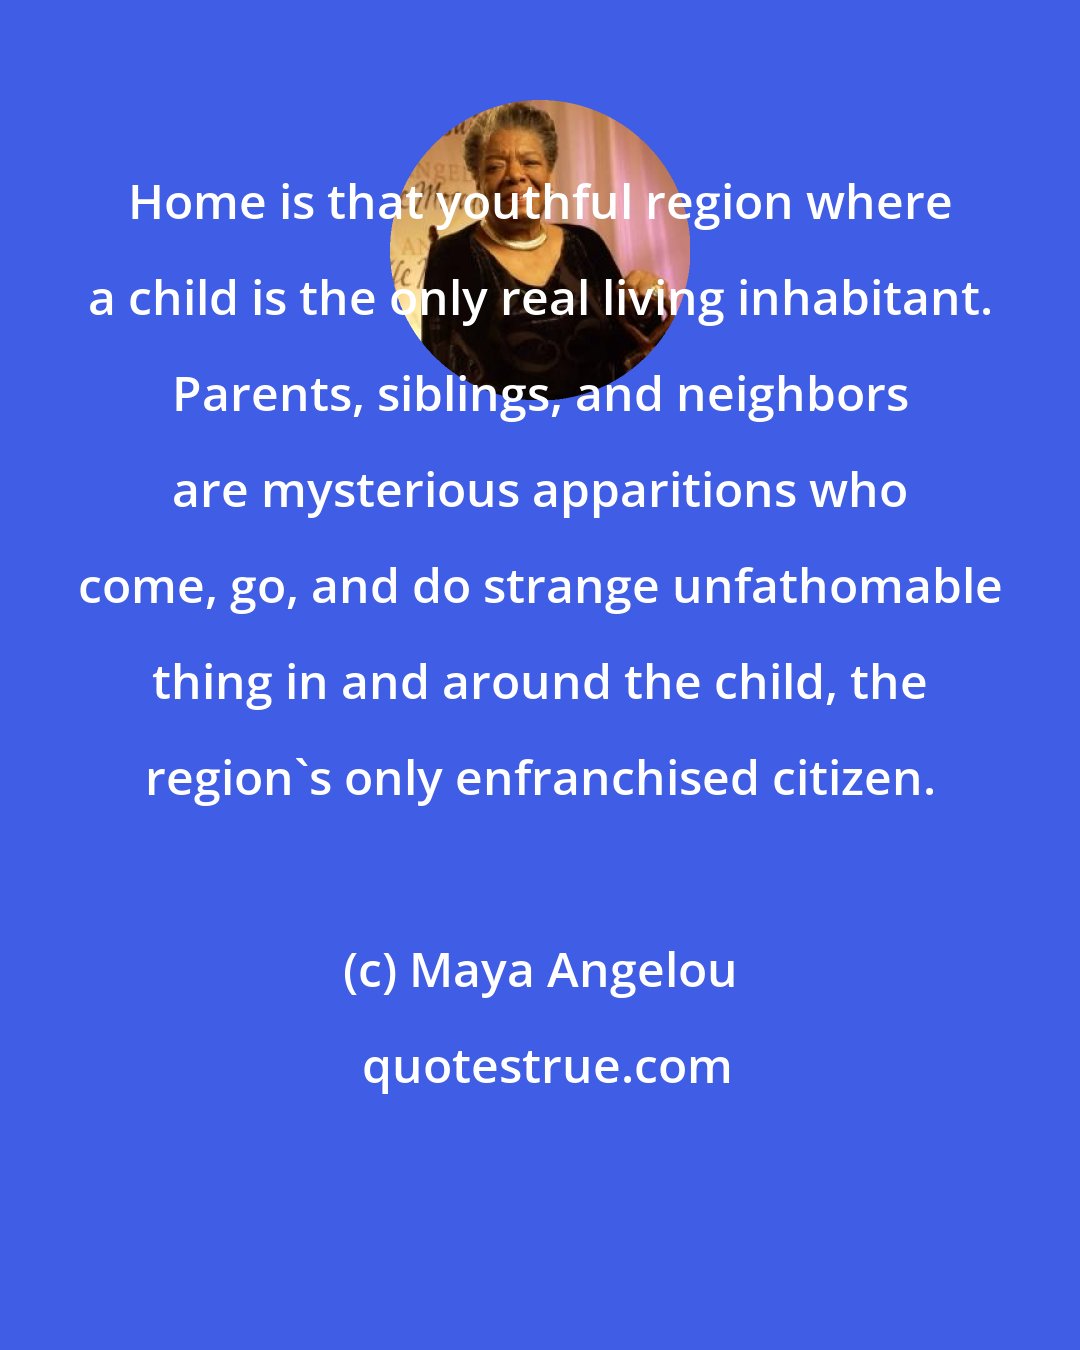 Maya Angelou: Home is that youthful region where a child is the only real living inhabitant. Parents, siblings, and neighbors are mysterious apparitions who come, go, and do strange unfathomable thing in and around the child, the region's only enfranchised citizen.